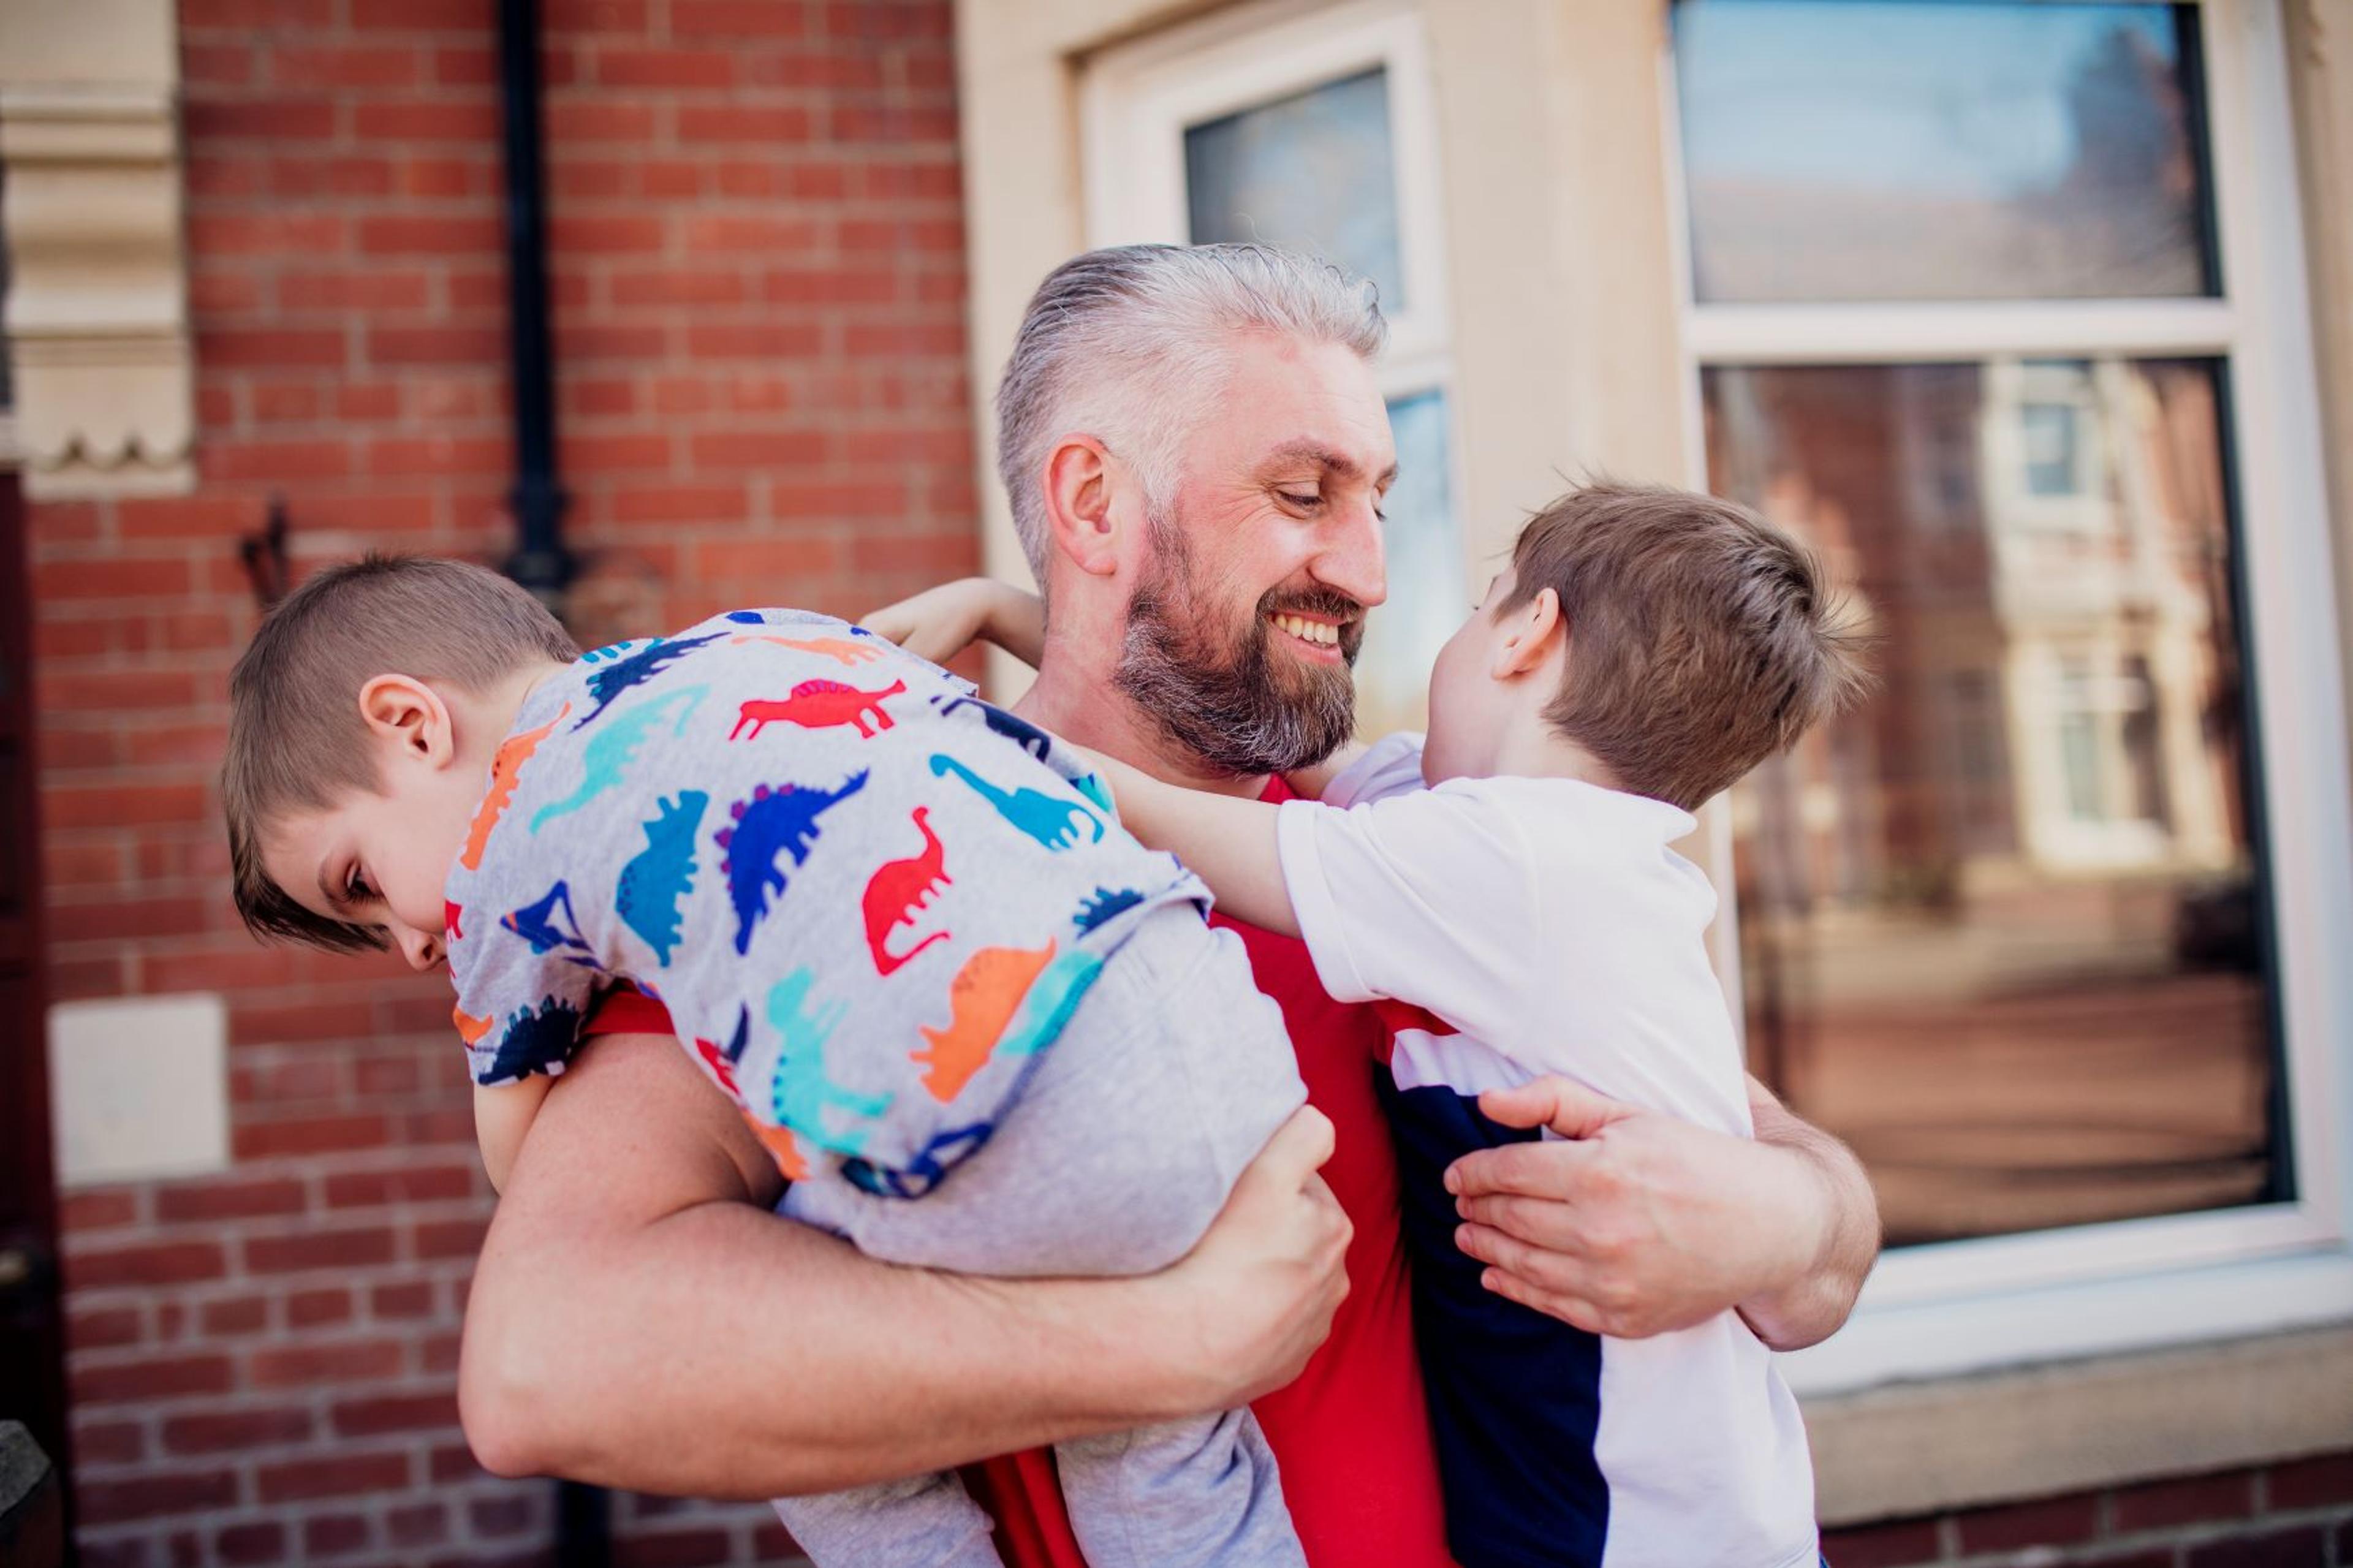 A man stands outside a house, in his arms are two young boys hugging him. He is smiling at them.